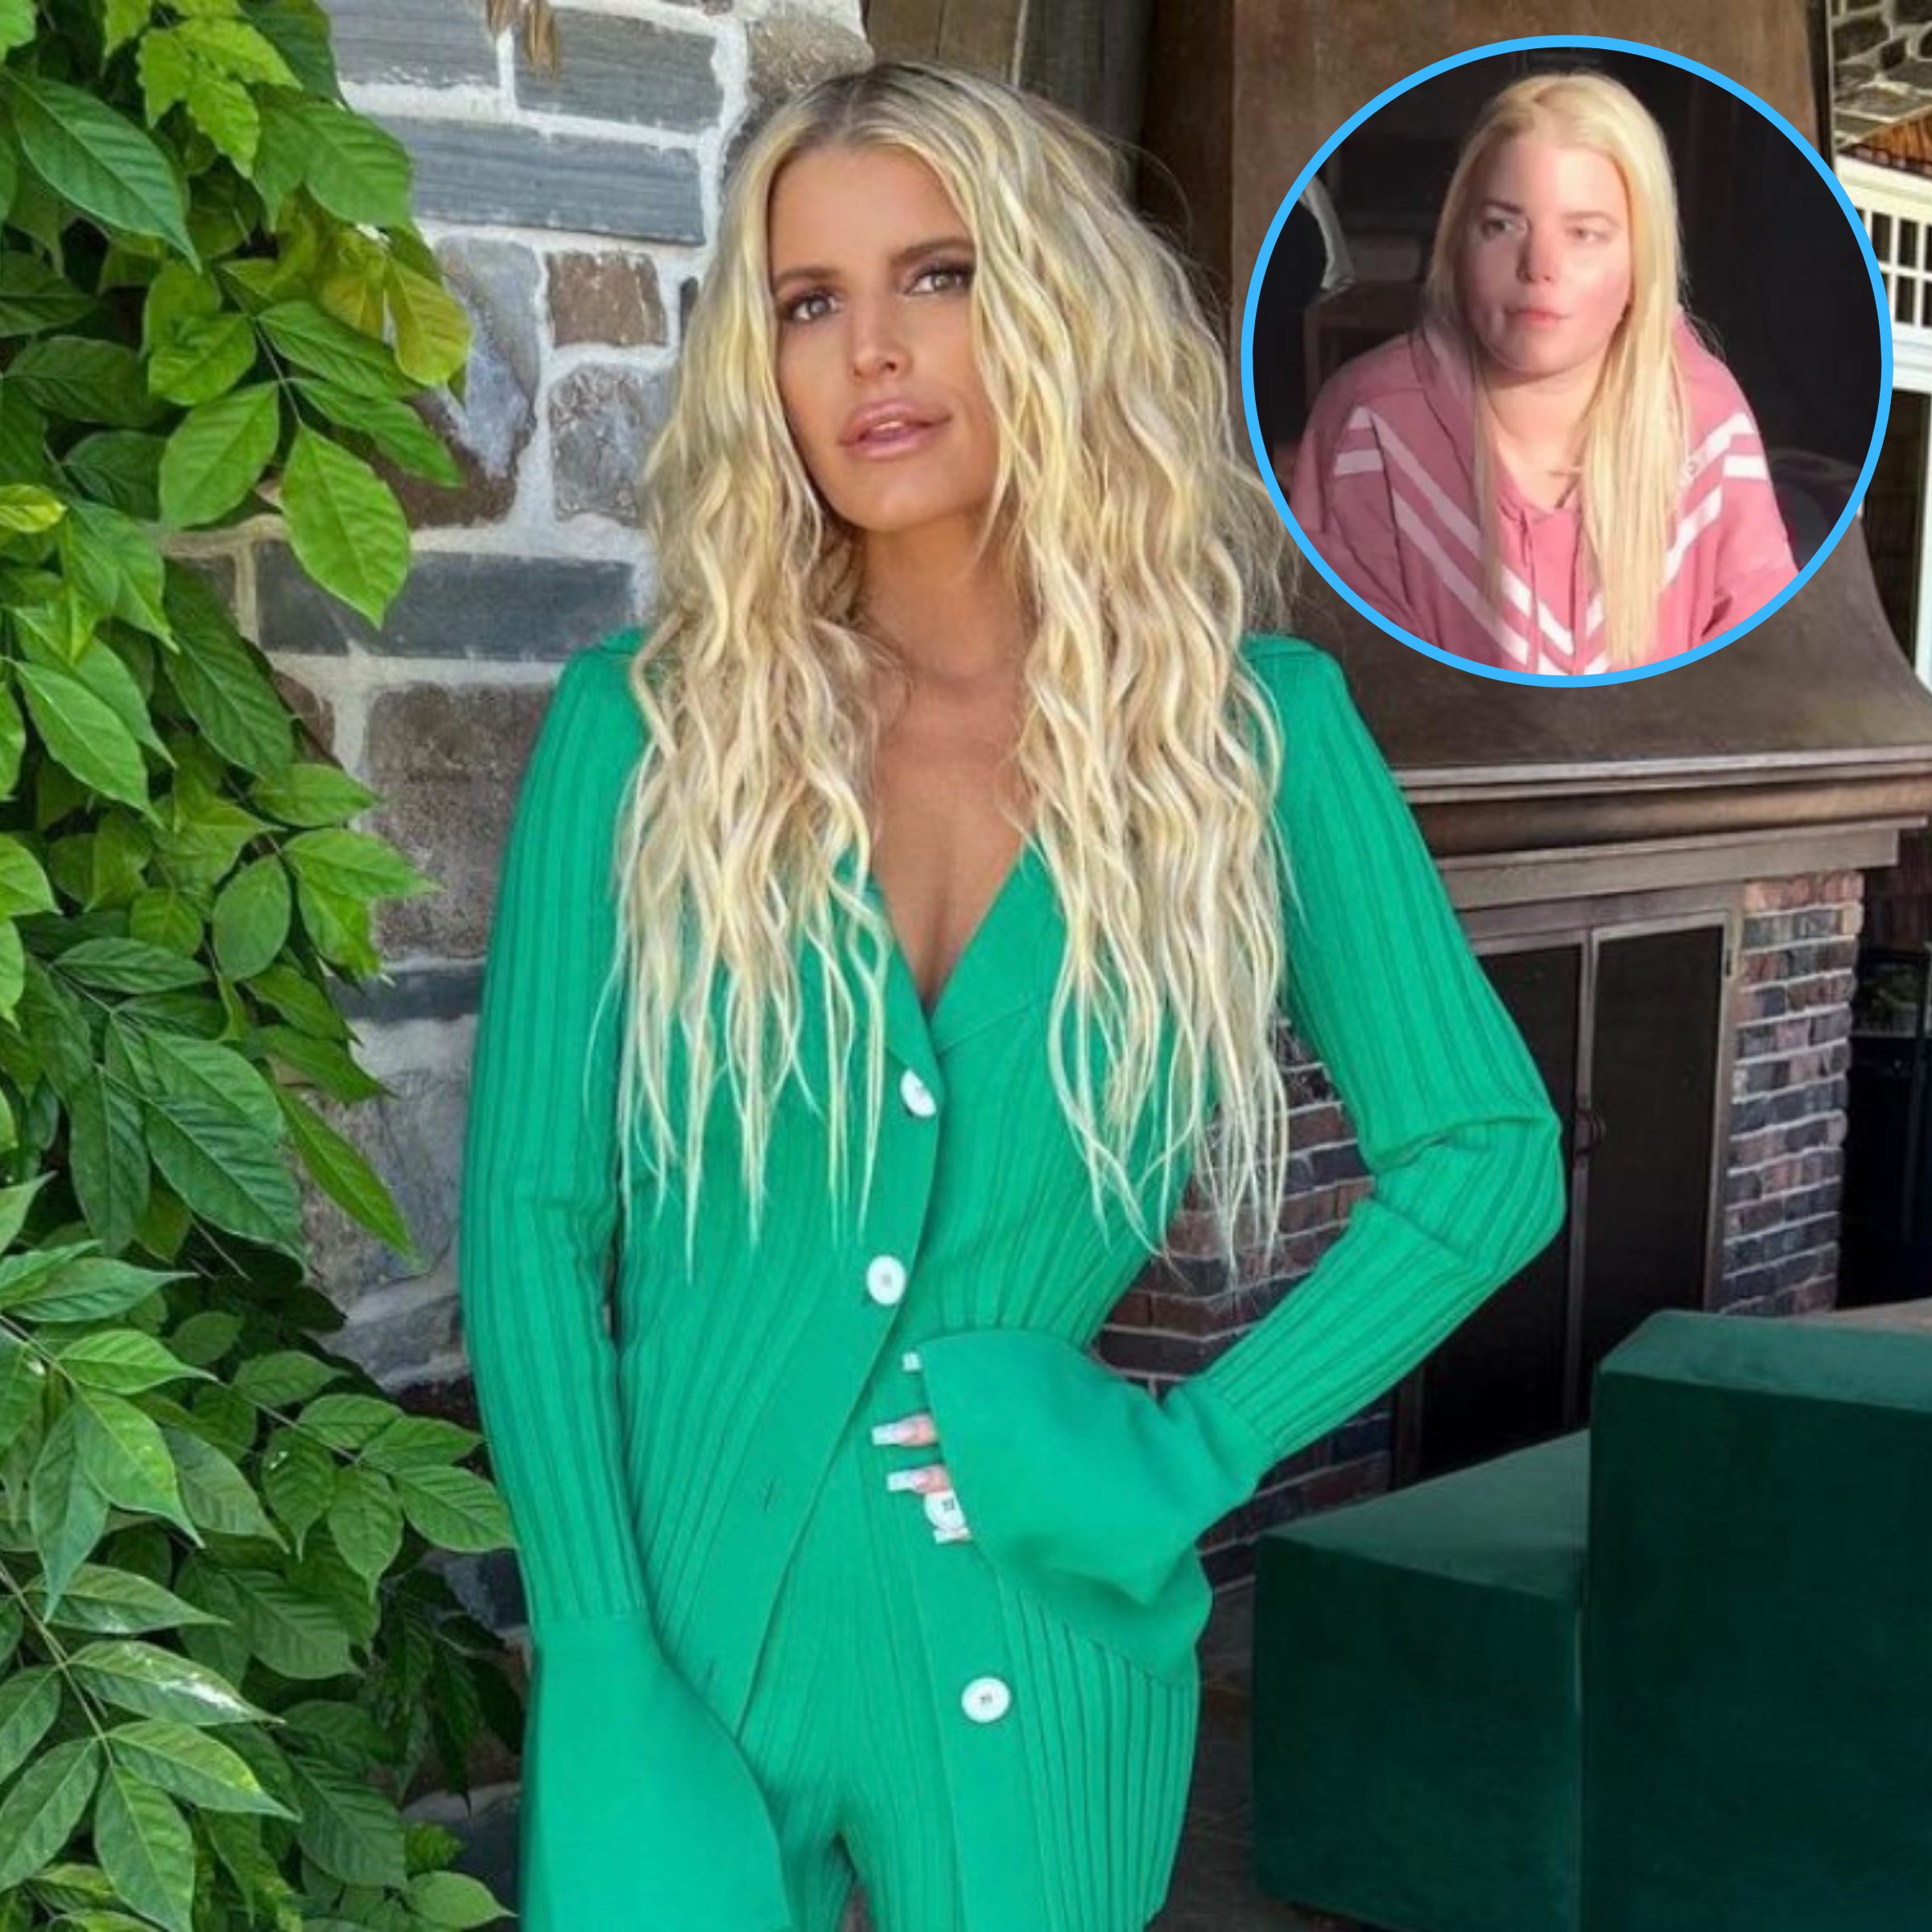 Jessica Simpson Celebrates Being 6 Years Sober By Sharing 'Unrecognizable'  Before Photo